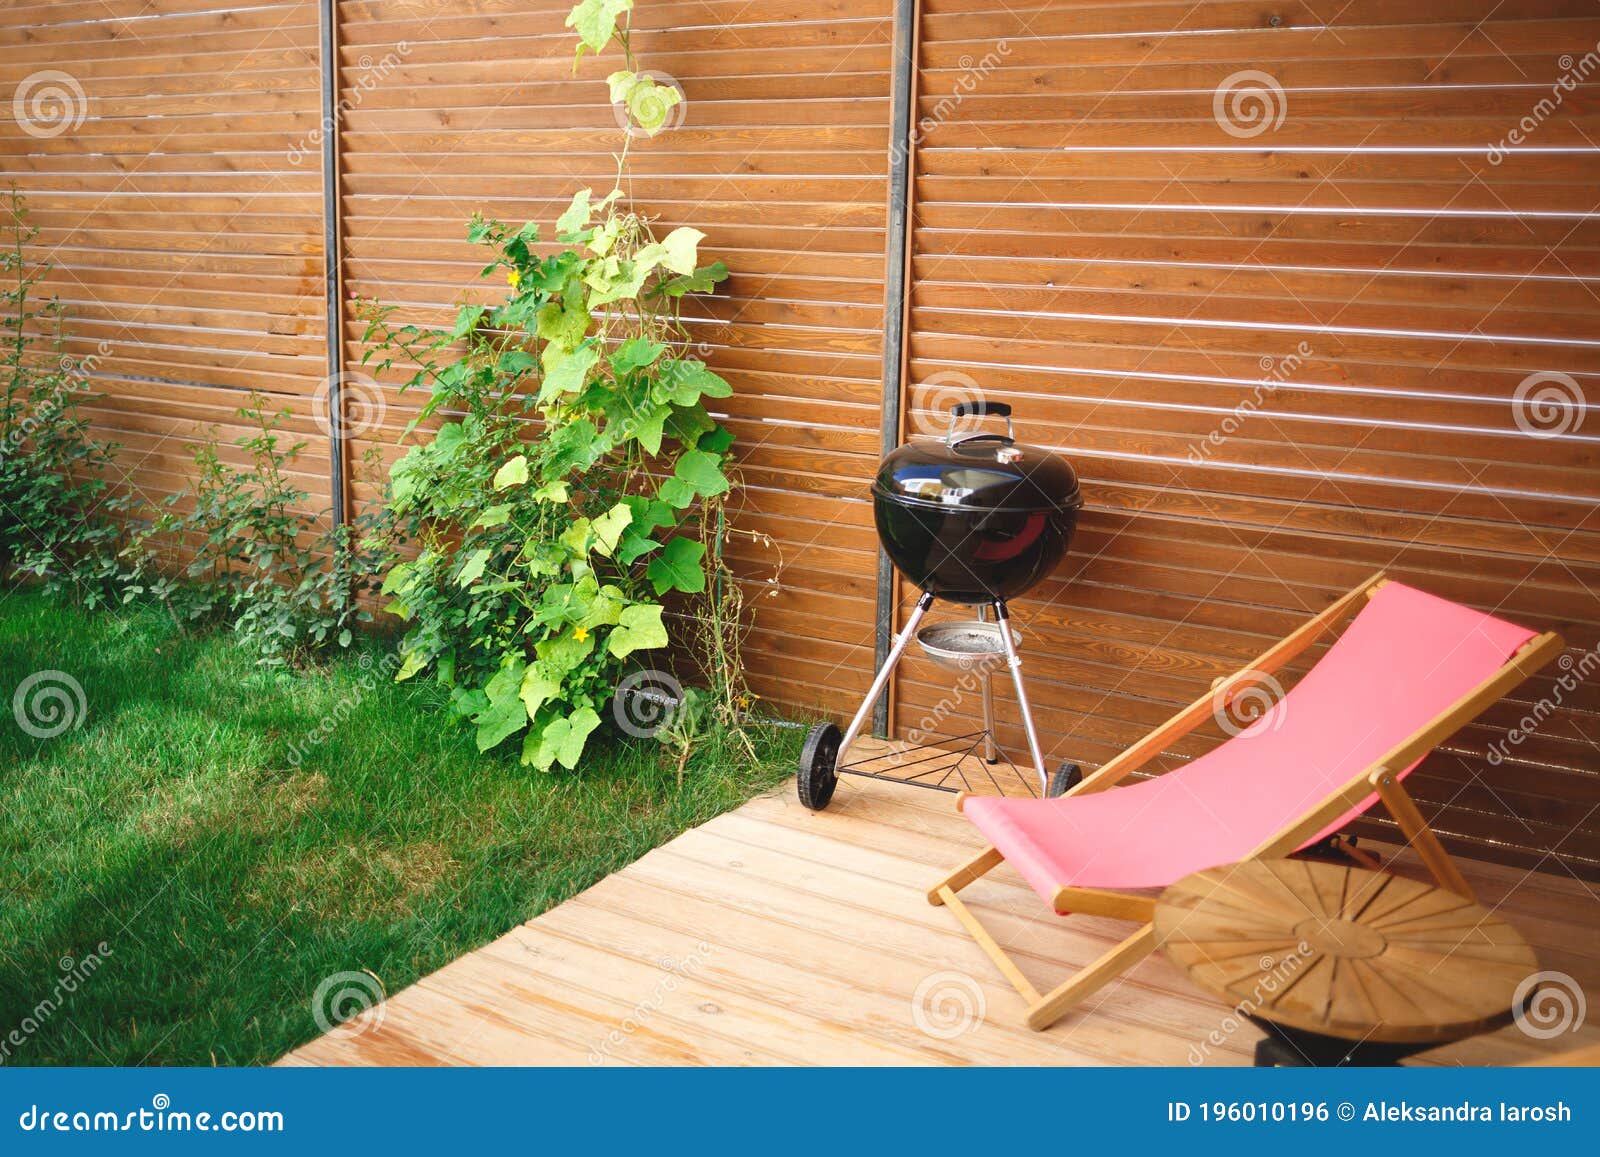 recreation area in the yard of the house: chairs, barbecue, table